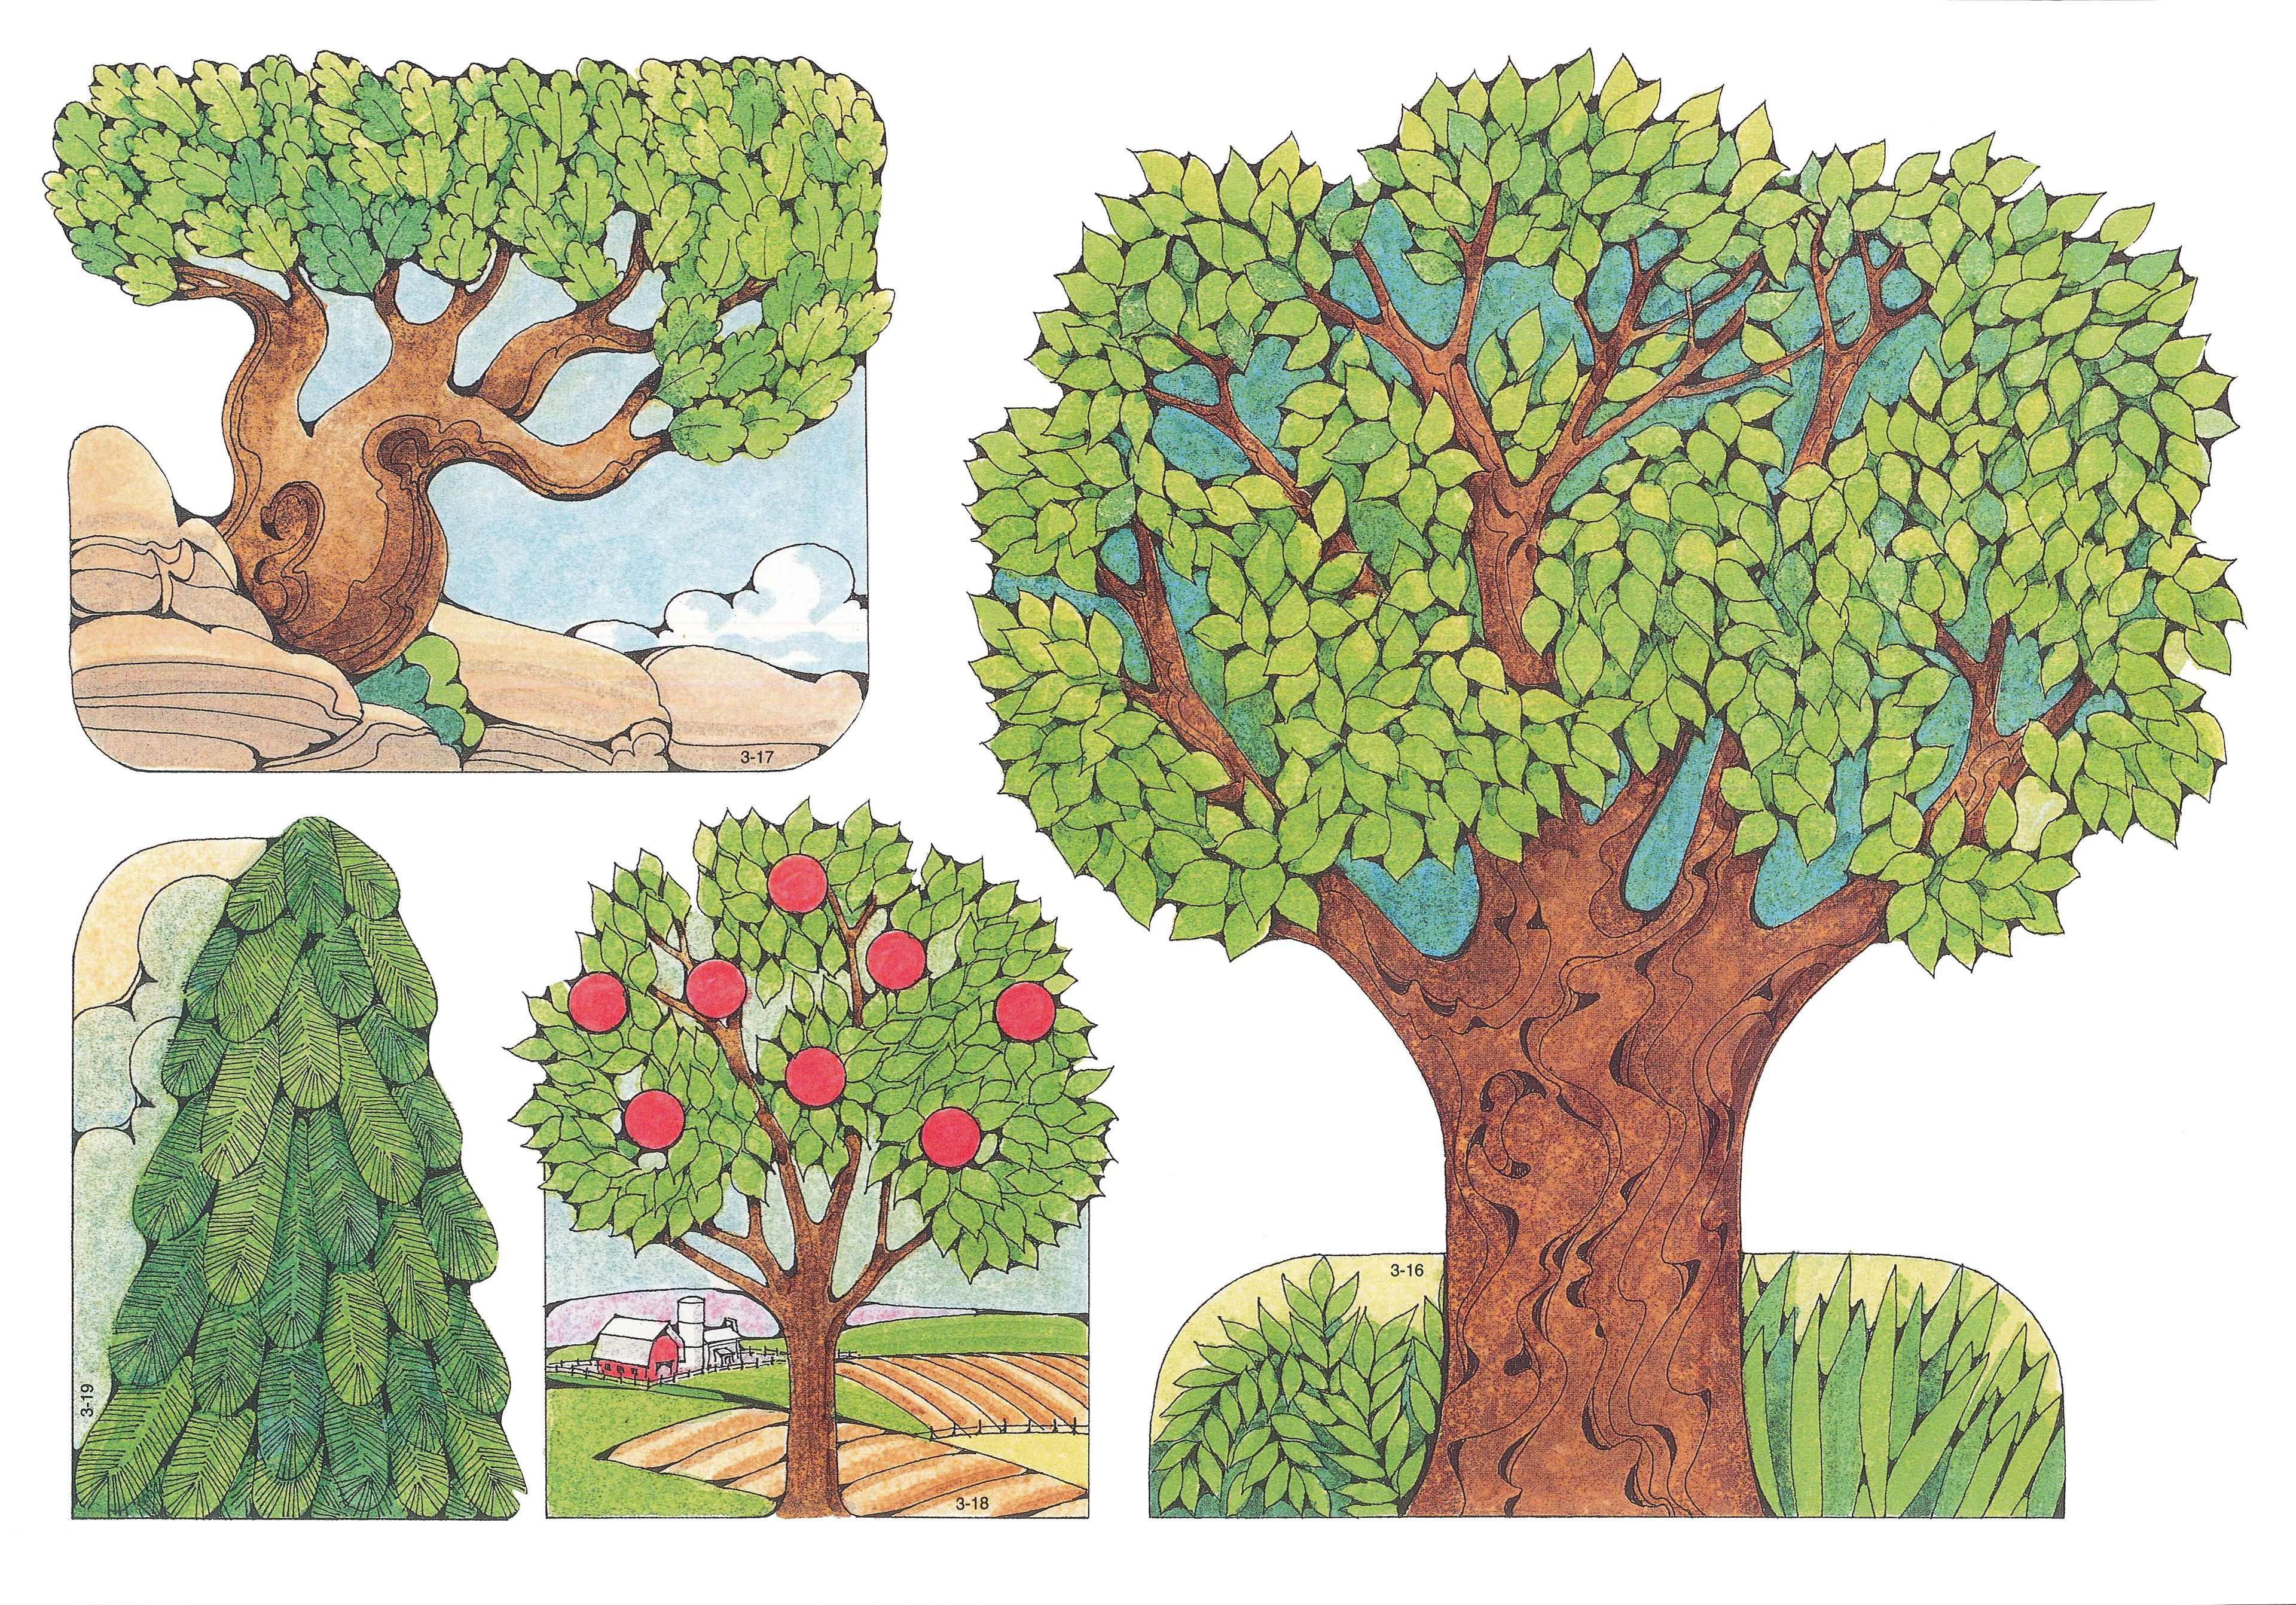 Primary Visual Aids: Cutouts 3-16, Large Tree with Grass; 3-17, Small Gnarled Tree with Rocks; 3-18, Small Tree with Red Apples on a Farm; 3-19, Small Pine Tree.